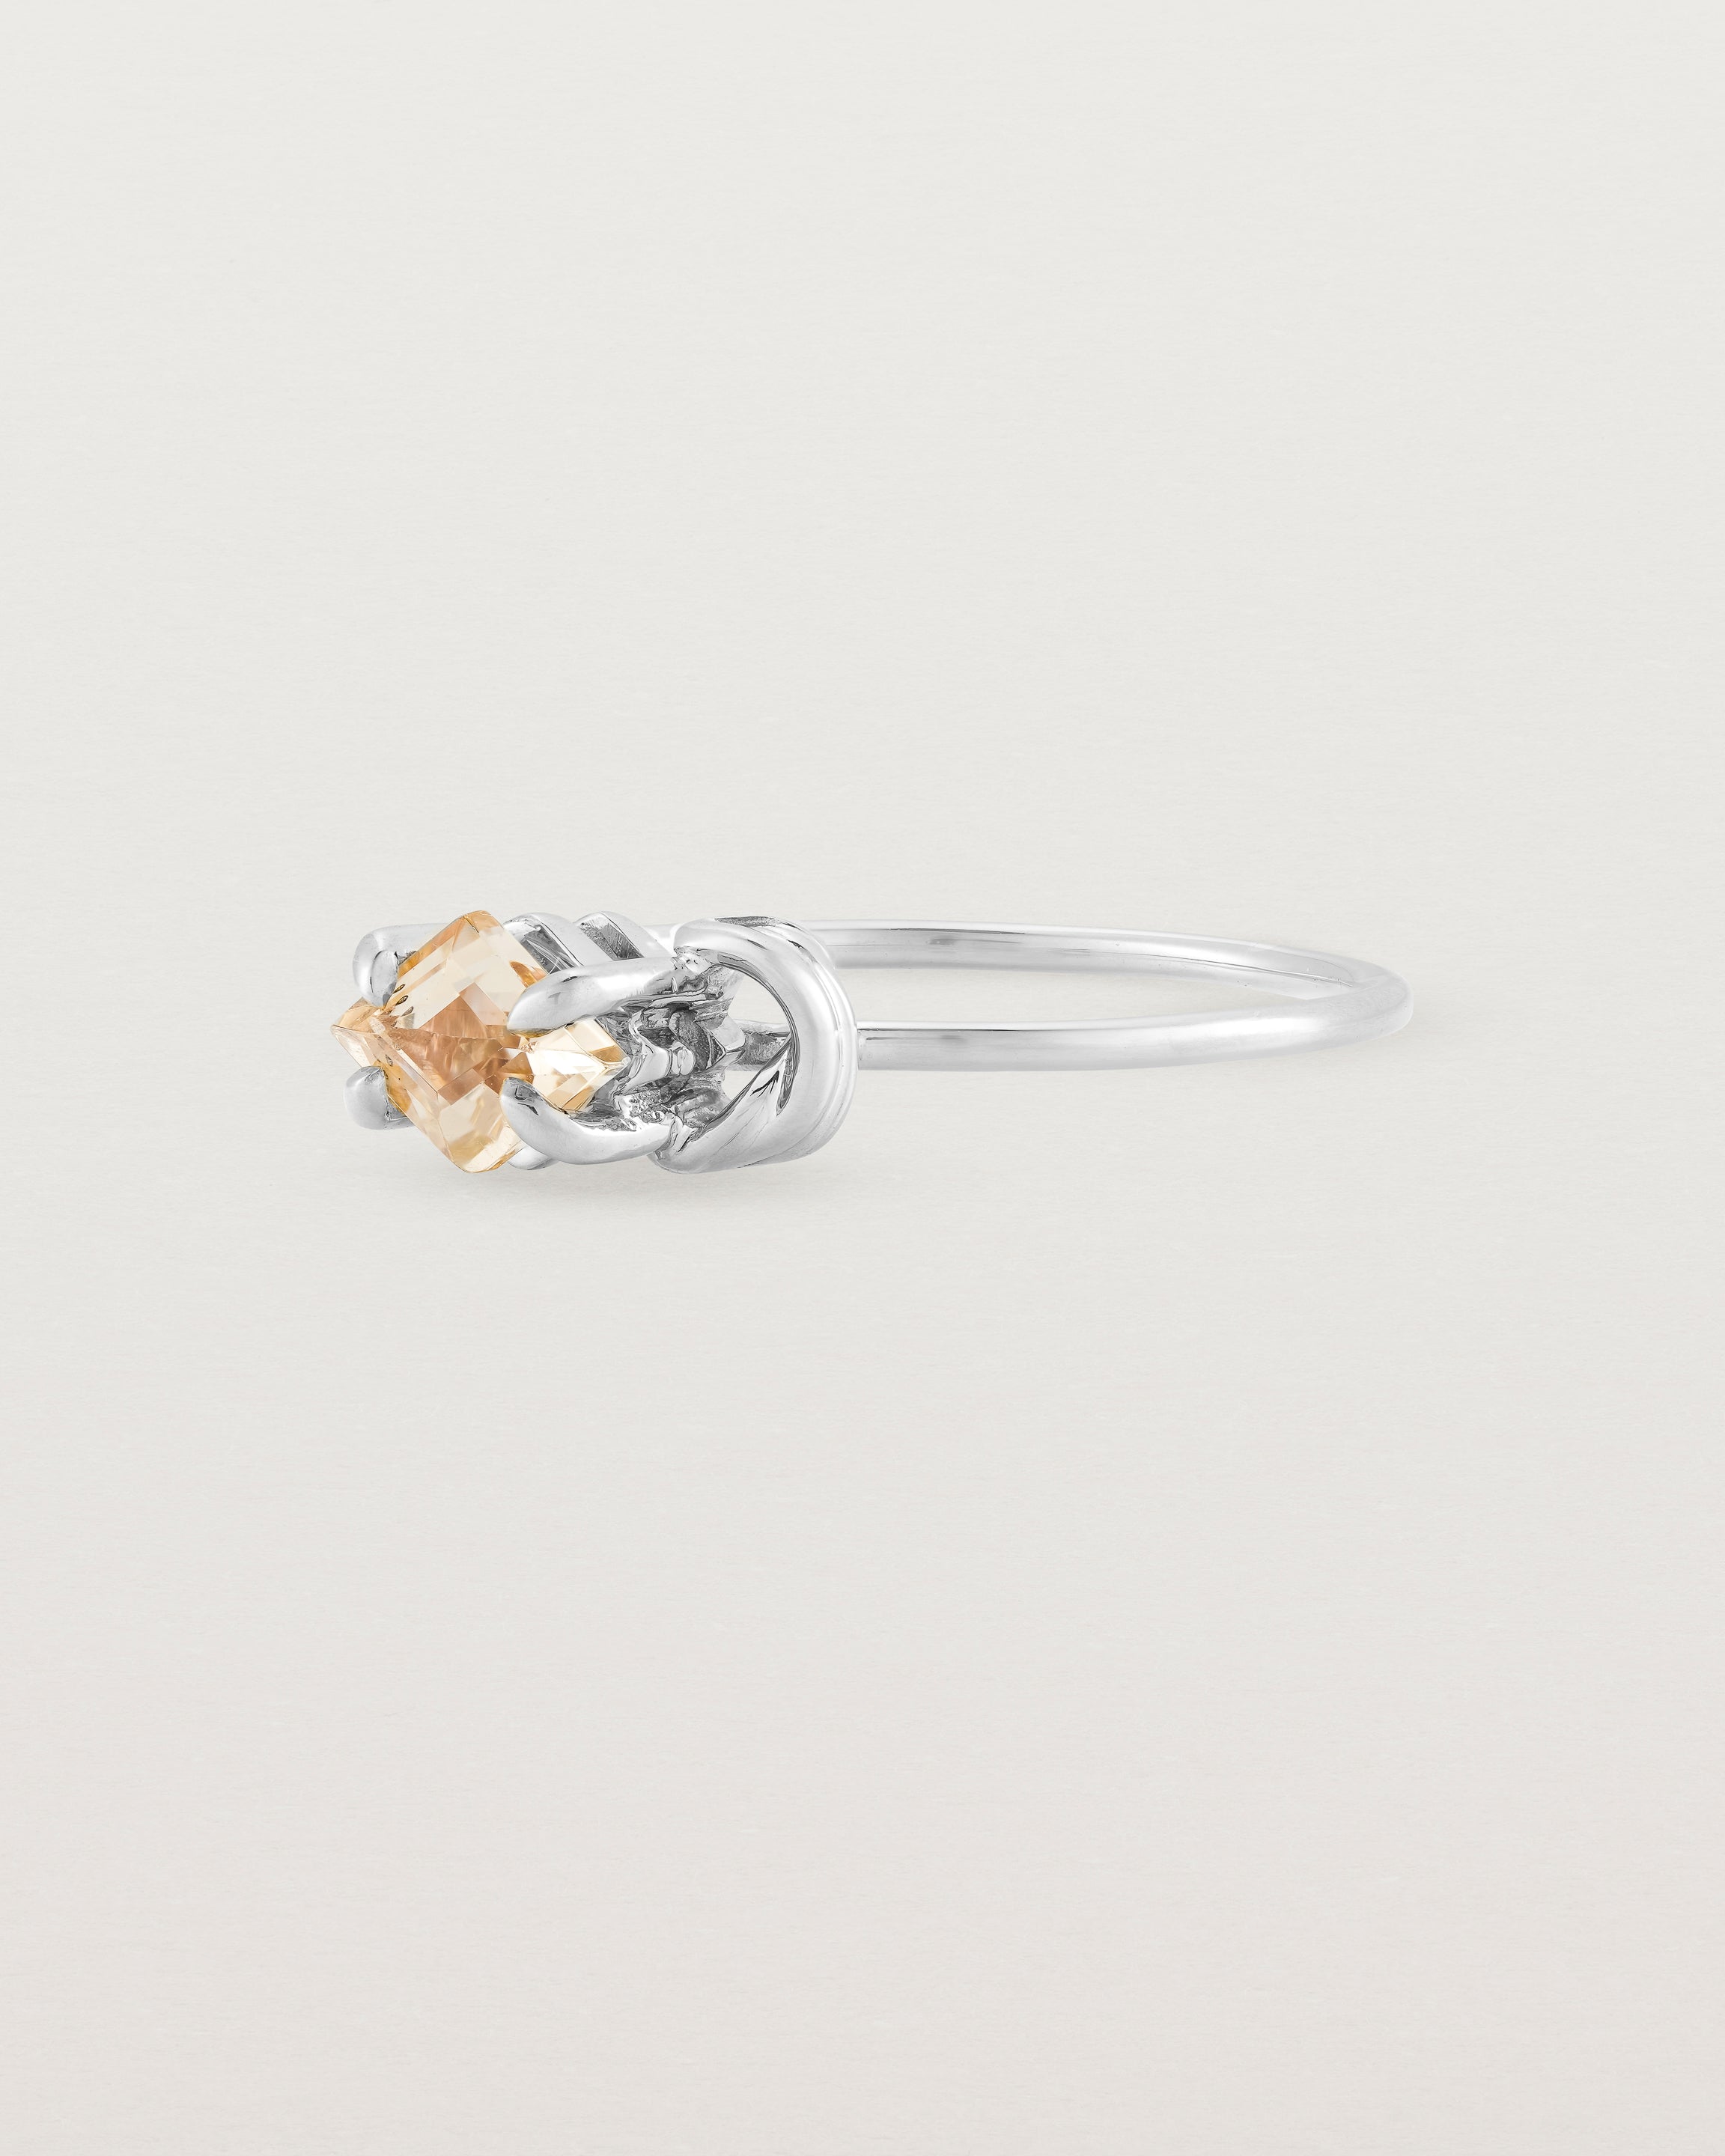 Angled view of the Nuna Ring | Savannah Sunstone in White Gold.